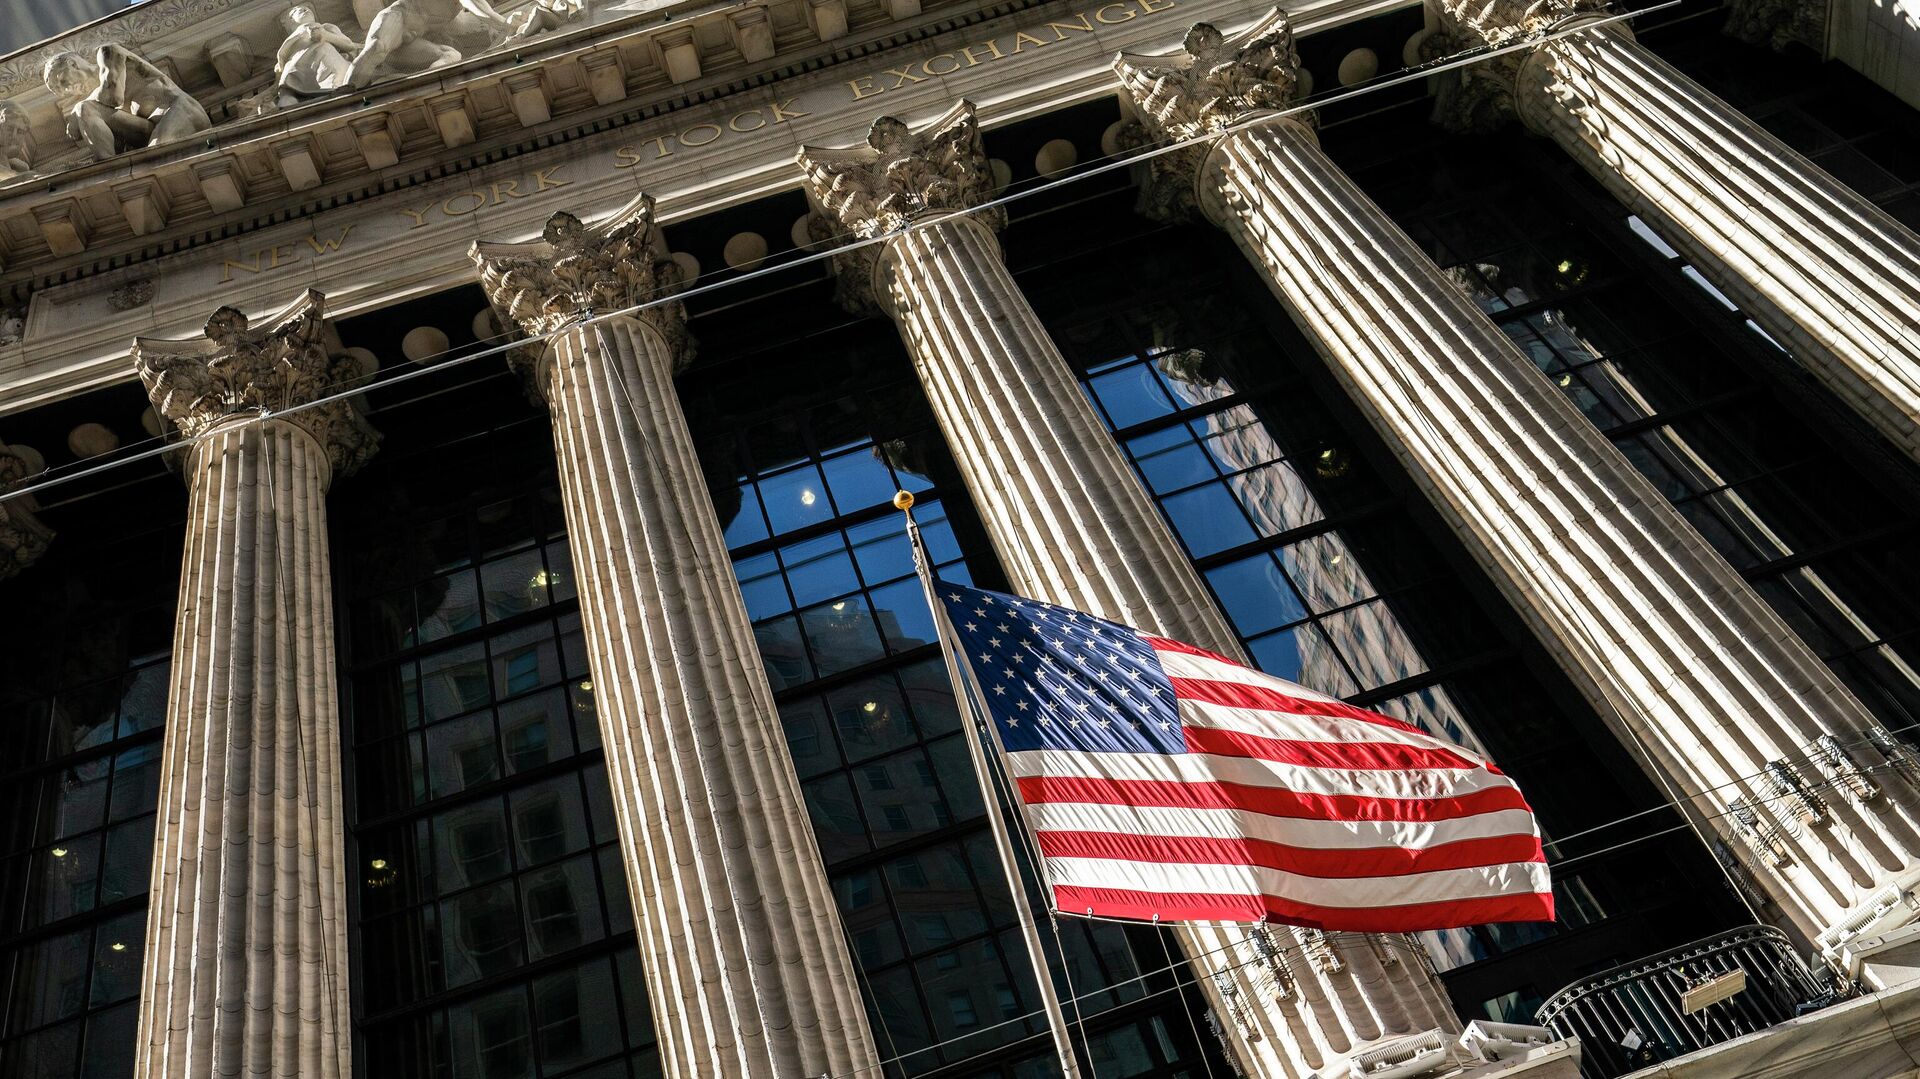 A U.S. flag waves outside the New York Stock Exchange, Monday, Jan. 24, 2022, in New York. Stocks are drifting between small gains and losses in the early going on Wall Street Tuesday, May 3, 2022 as investors await Wednesday's decision by the Federal Reserve on interest rates. The Fed is expected to raise its benchmark rate by twice the usual amount this week as it steps up its fight against inflation, which is at a four-decade high. - Sputnik International, 1920, 22.06.2022